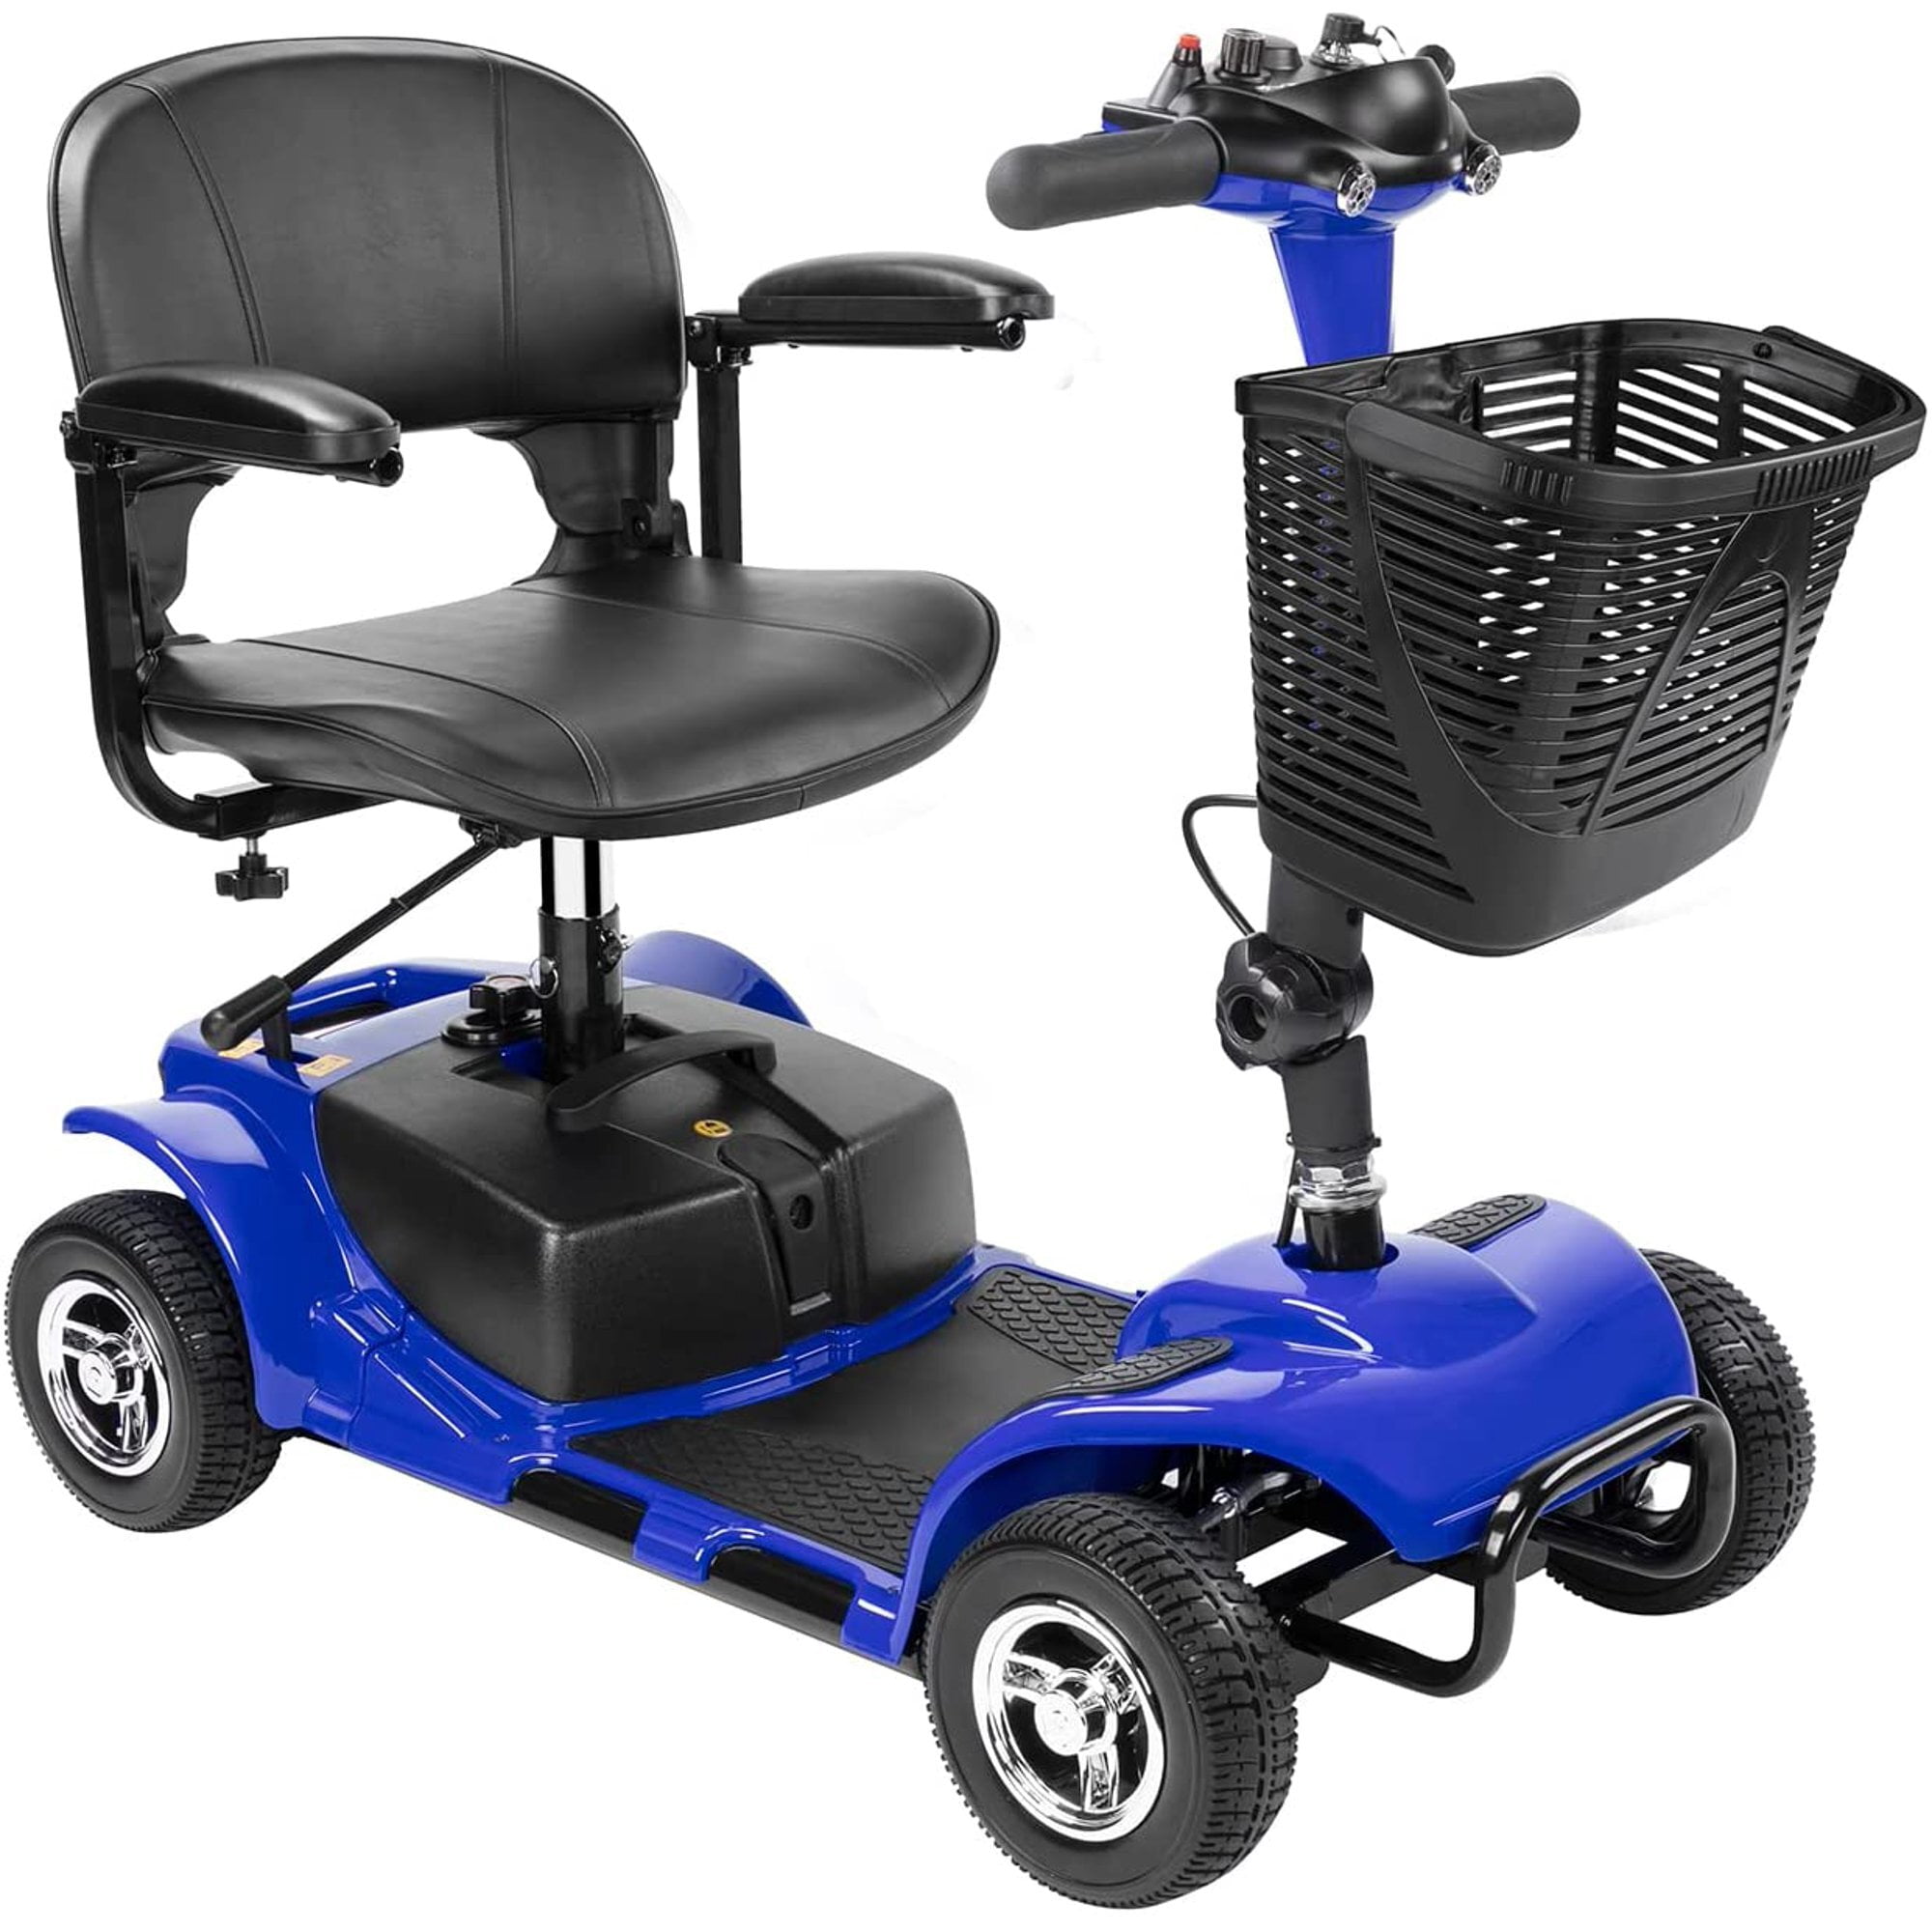 1inchome 4 Wheel Mobility Scooter for Seniors, Folding Electric Powered Wheelchair Device for Adults, Elderly, Gift Elderly, Blue - Walmart.com